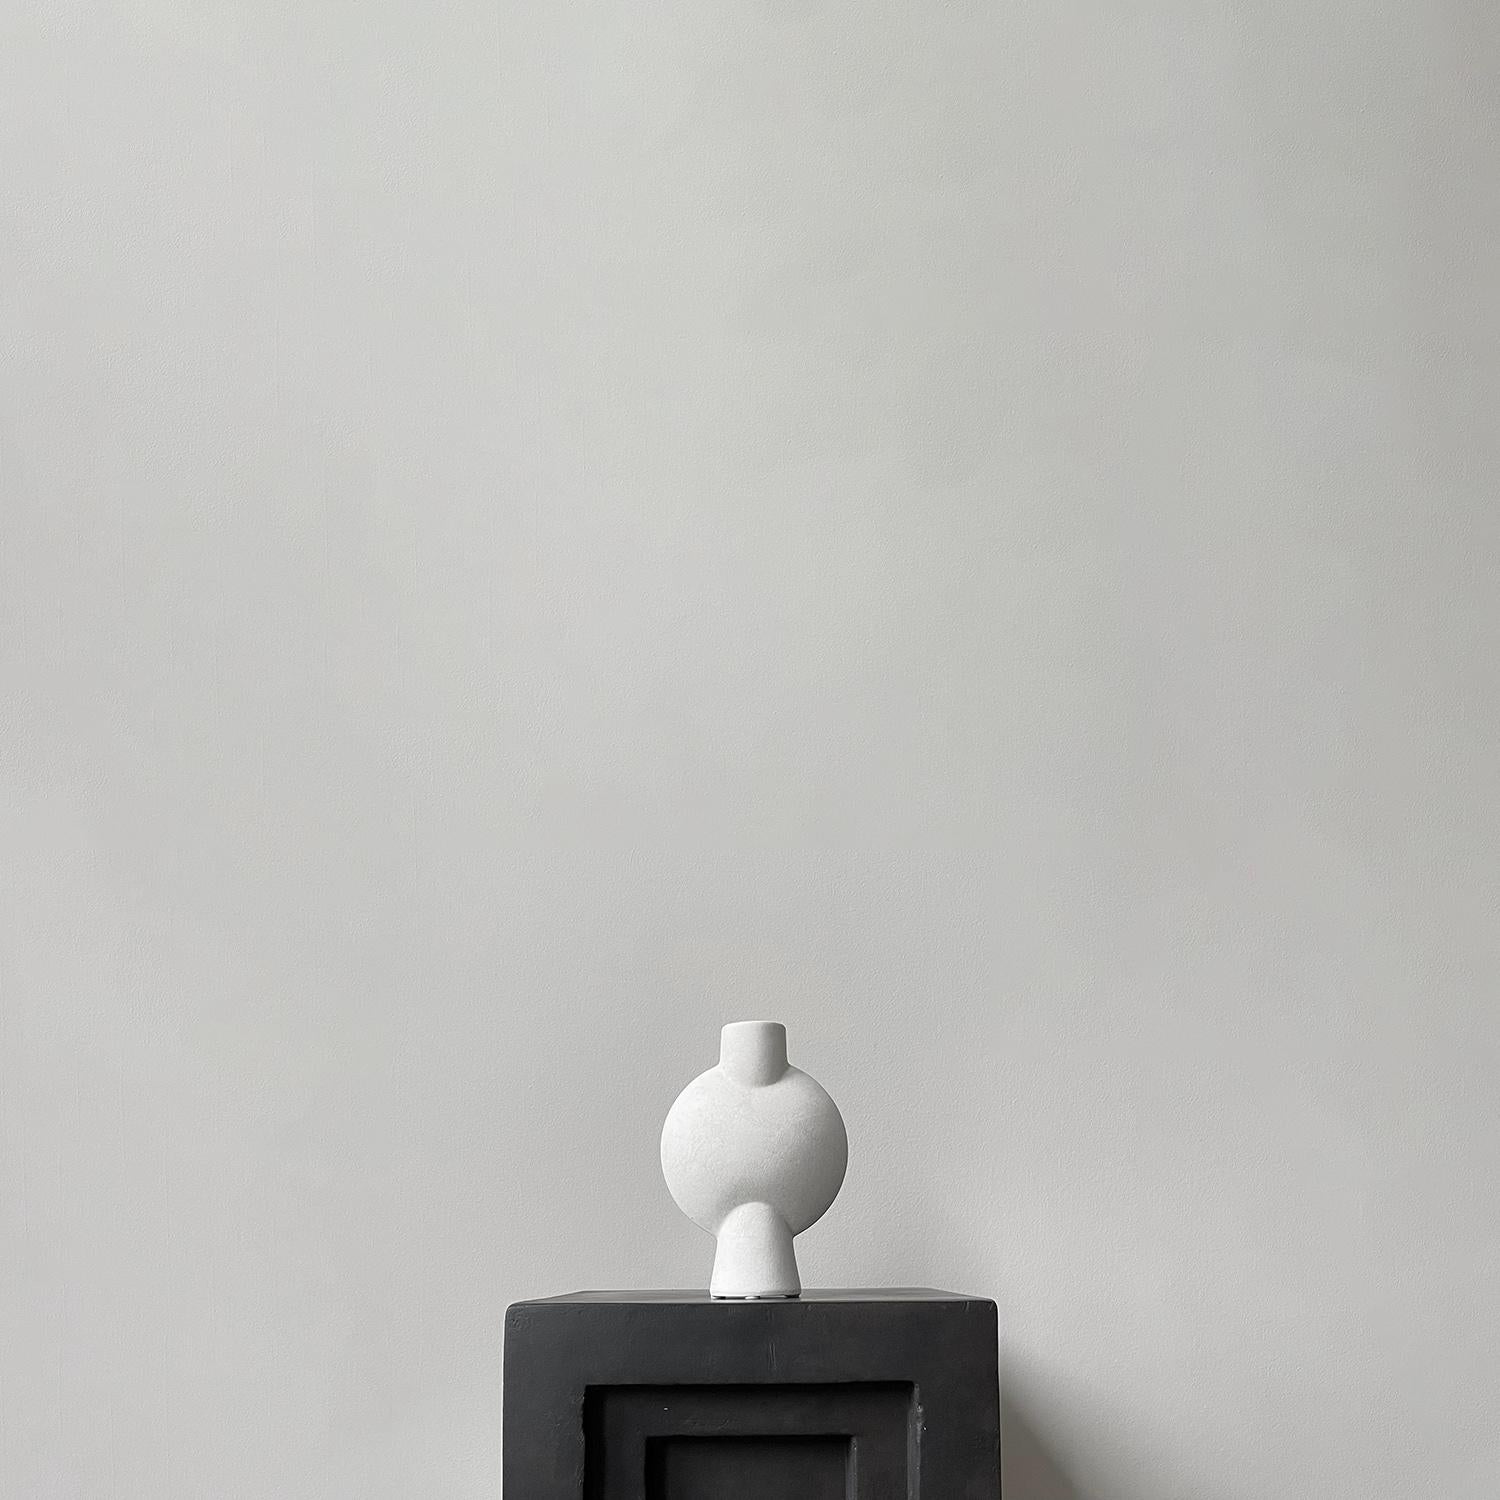 A Set of 4 sand mini sphere vase bubl by 101 Copenhagen
Designed by Kristian Sofus Hansen & Tommy Hyldahl
Dimensions: L13 / W6 / H18 CM
Materials: Ceramic

The Sphere collection celebrates unique silhouettes and textures that makes an impact